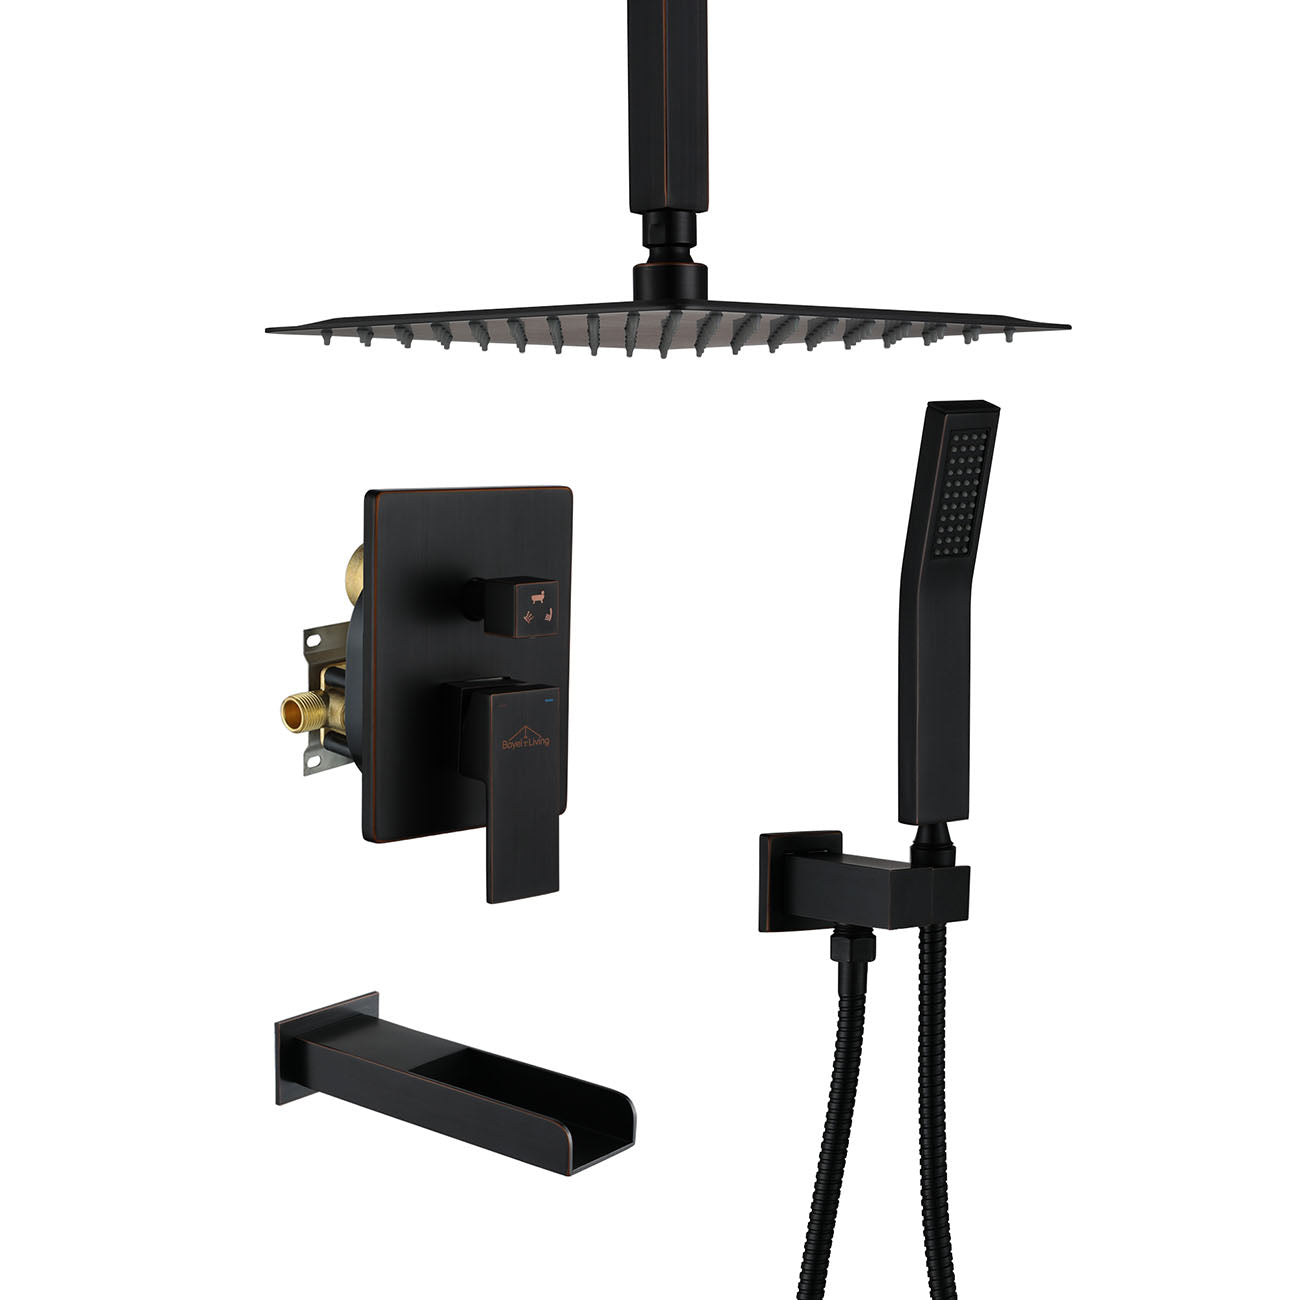 Boyel Living 10 Inch Ceiling Mount Shower System with Bathtub Faucet in Oil Rubbed Bronze